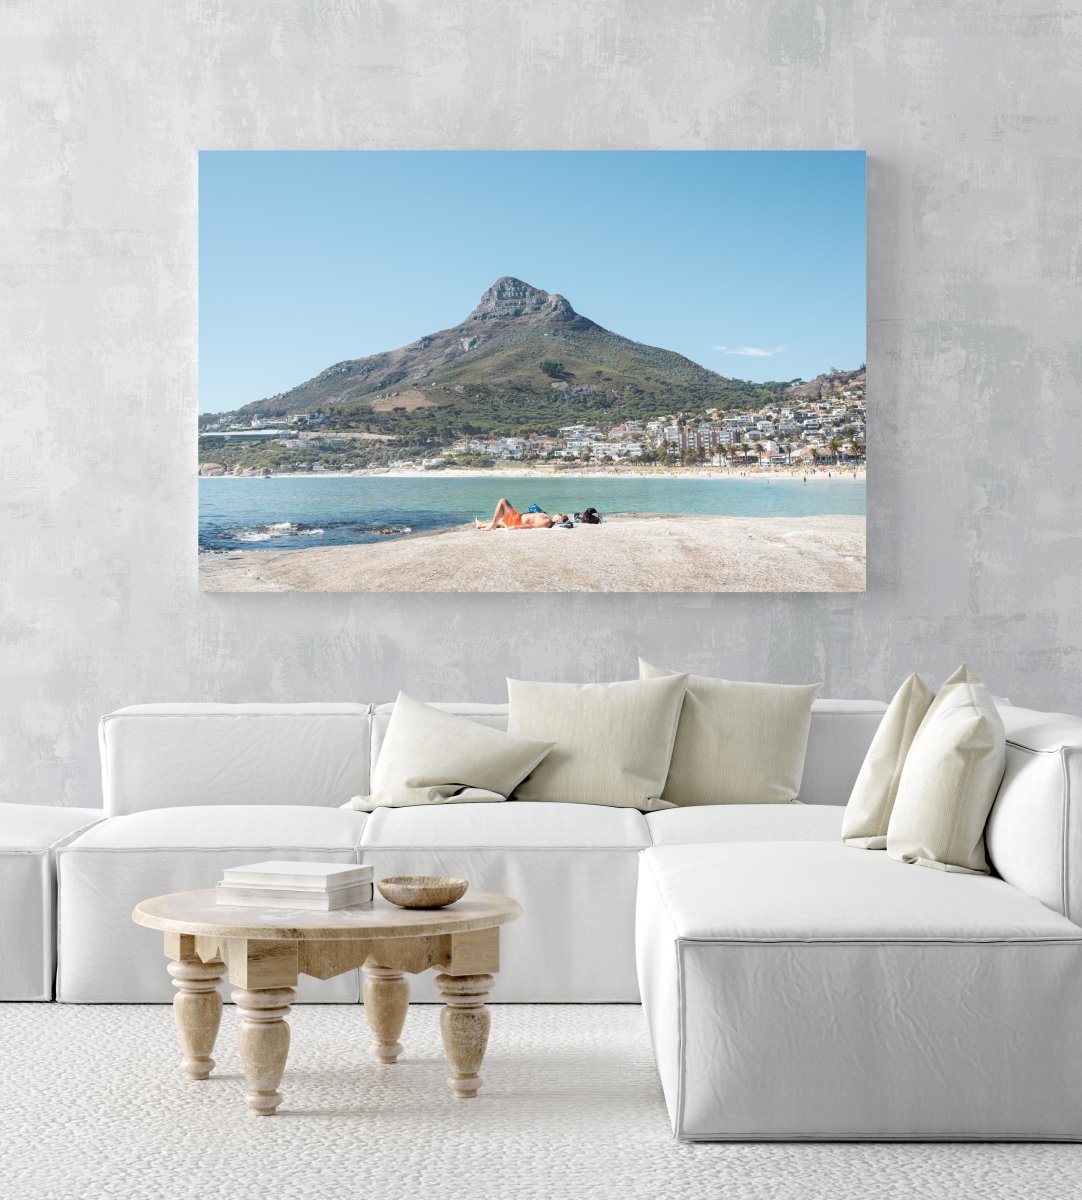 Lions Head mountain from Camps Bay Beach in Cape Town in an acrylic/perspex frame